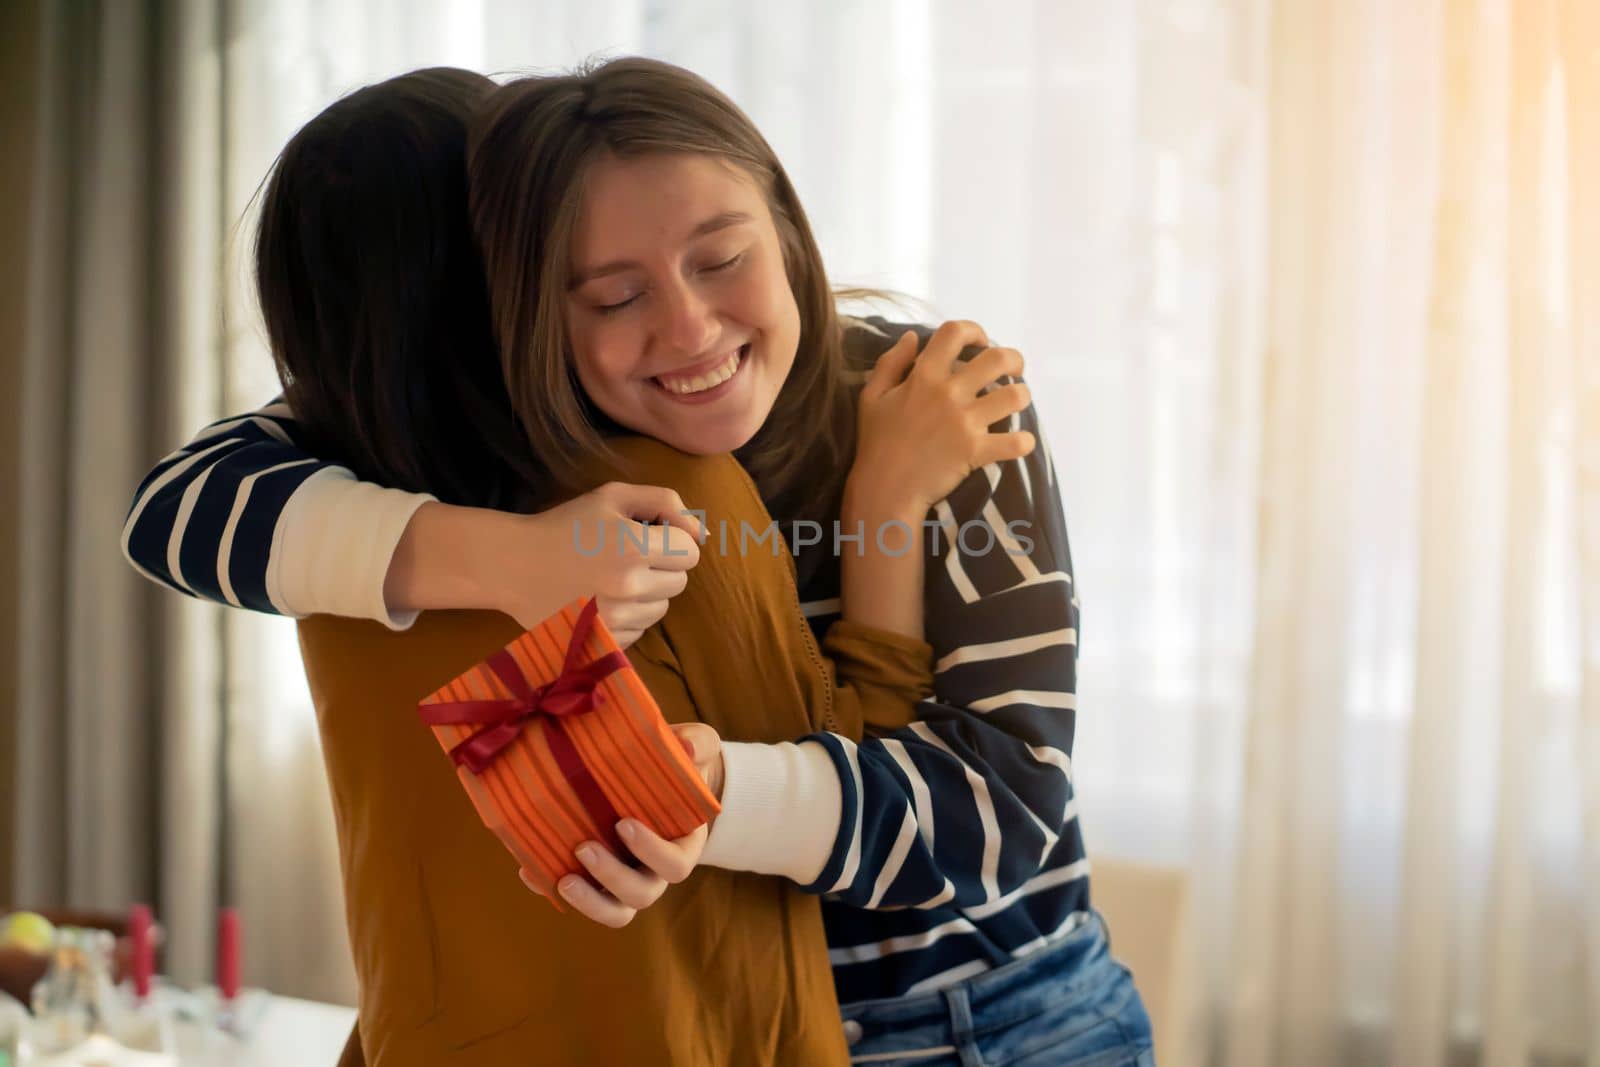 Two happy young girls laugh, friends hug and give each other gifts during the holiday. Women surprise and congratulate on the anniversary of their relationship in their cozy home.